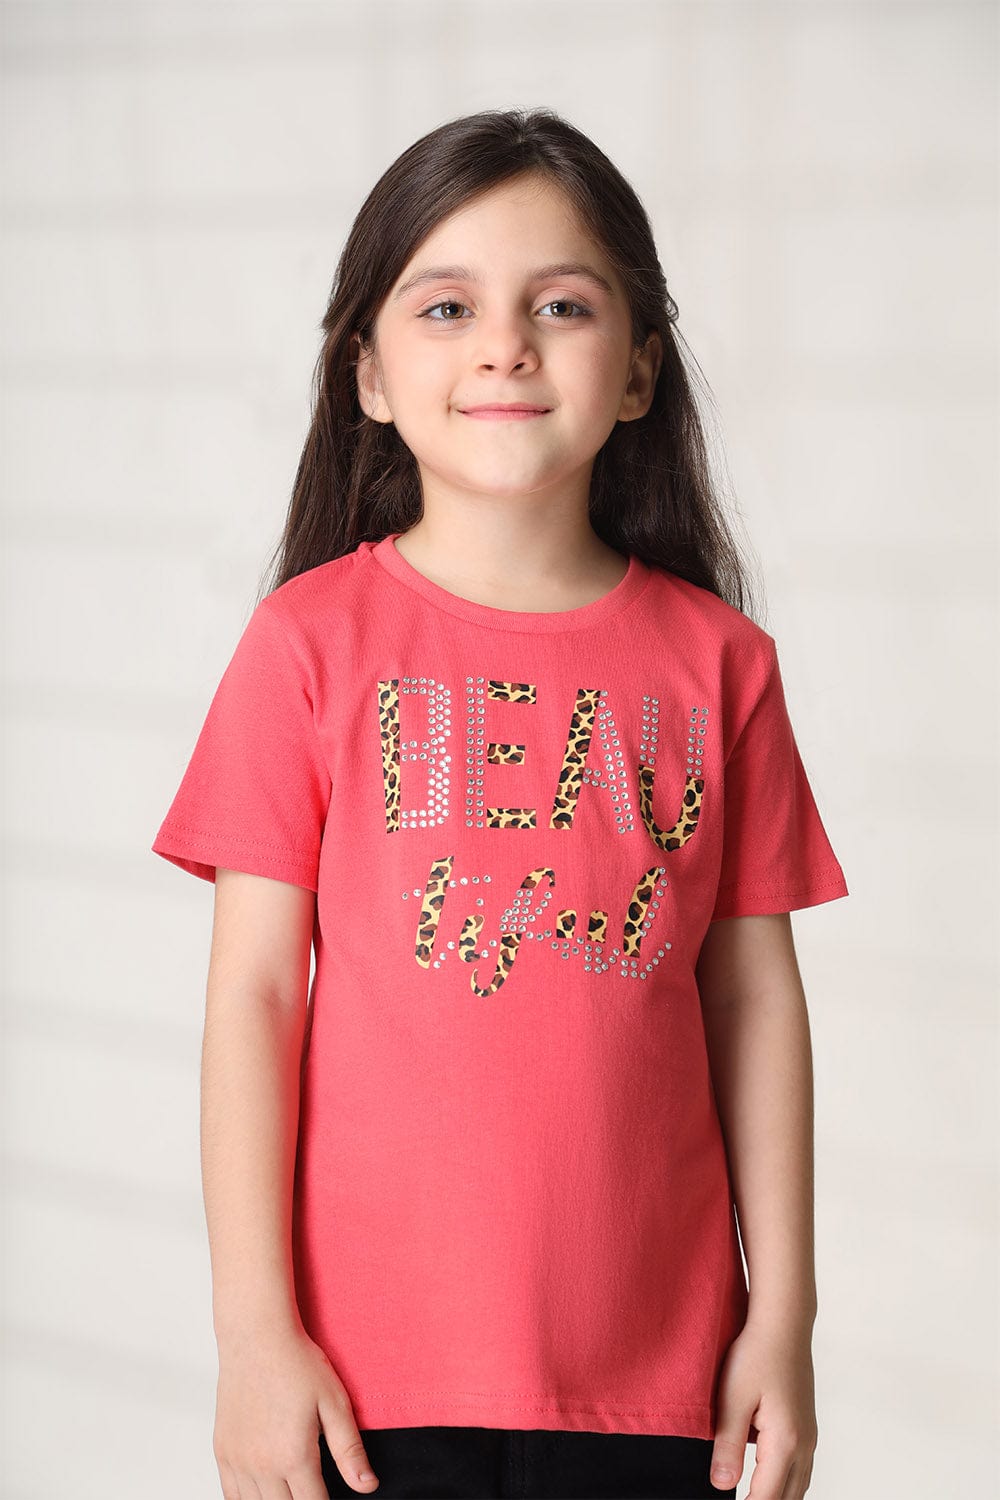 Hope Not Out by Shahid Afridi Girls Knit T-Shirt Stunning Stone-Embellished Pink Half Sleeve Tee for Girls